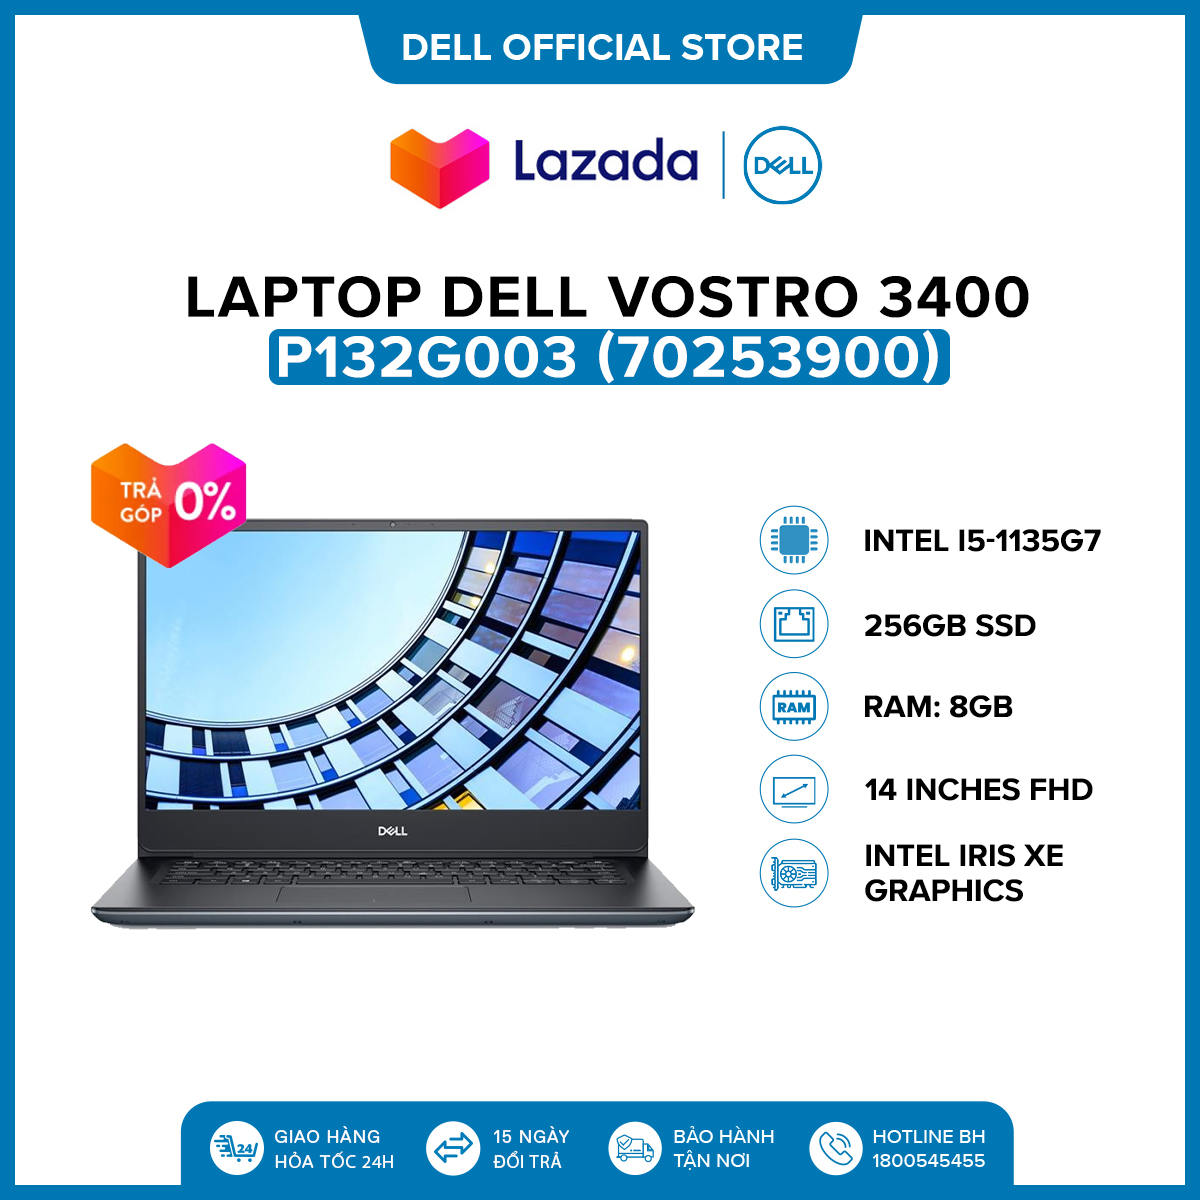 Laptop Dell Vostro 3400 14 Inches Fhd (Intel / I5-1135G7 / 8Gb / 256Gb Ssd / Office Hs19 / Mcafee...